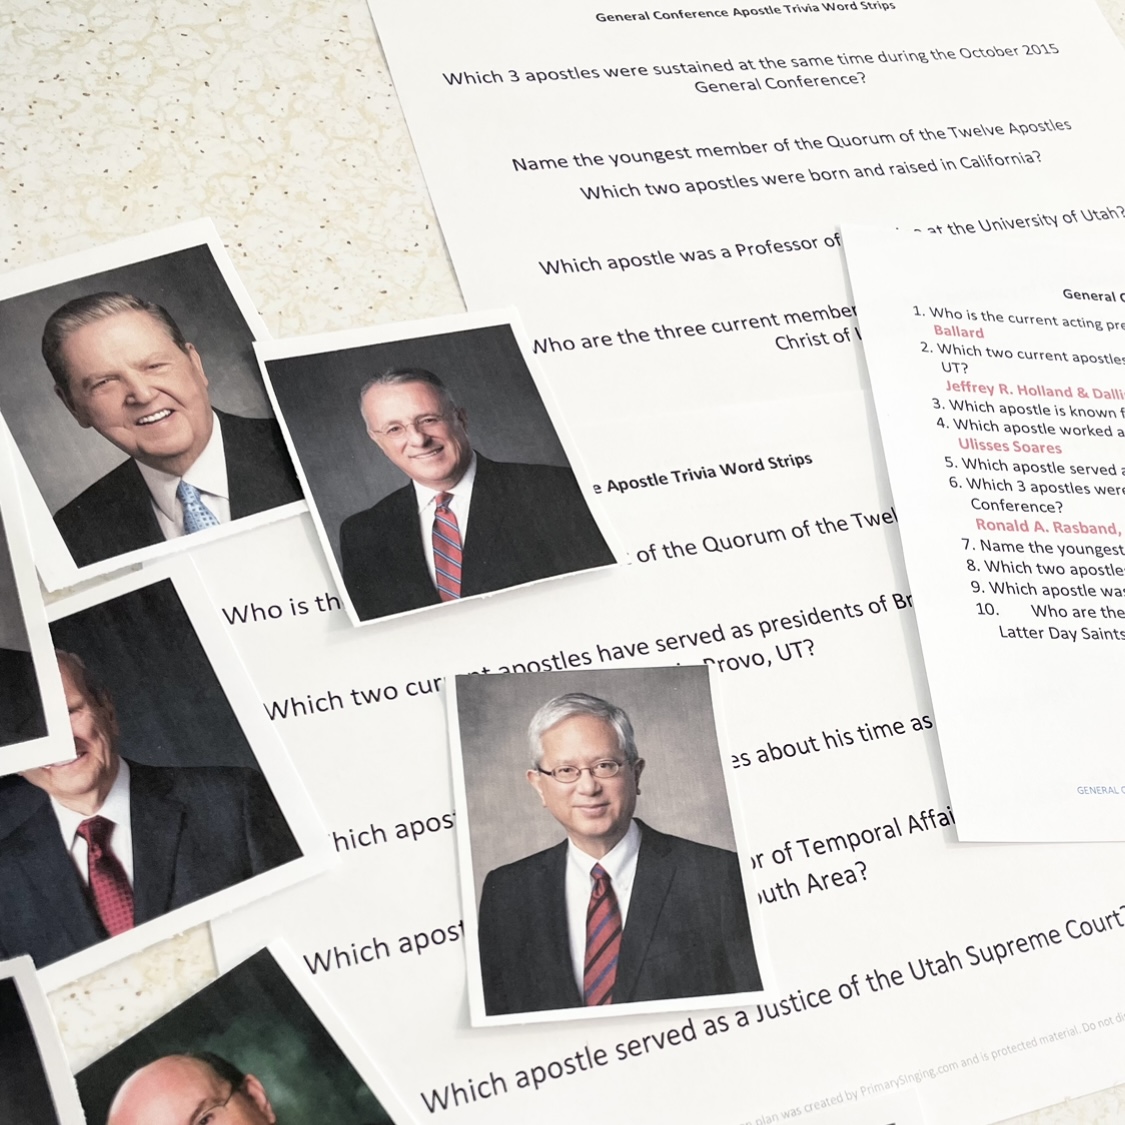 Help your primary kids get excited for General Conference with this fun General Conference Apostle Trivia game of matching trivia questions to pictures of apostles for LDS Primary Music Leaders.